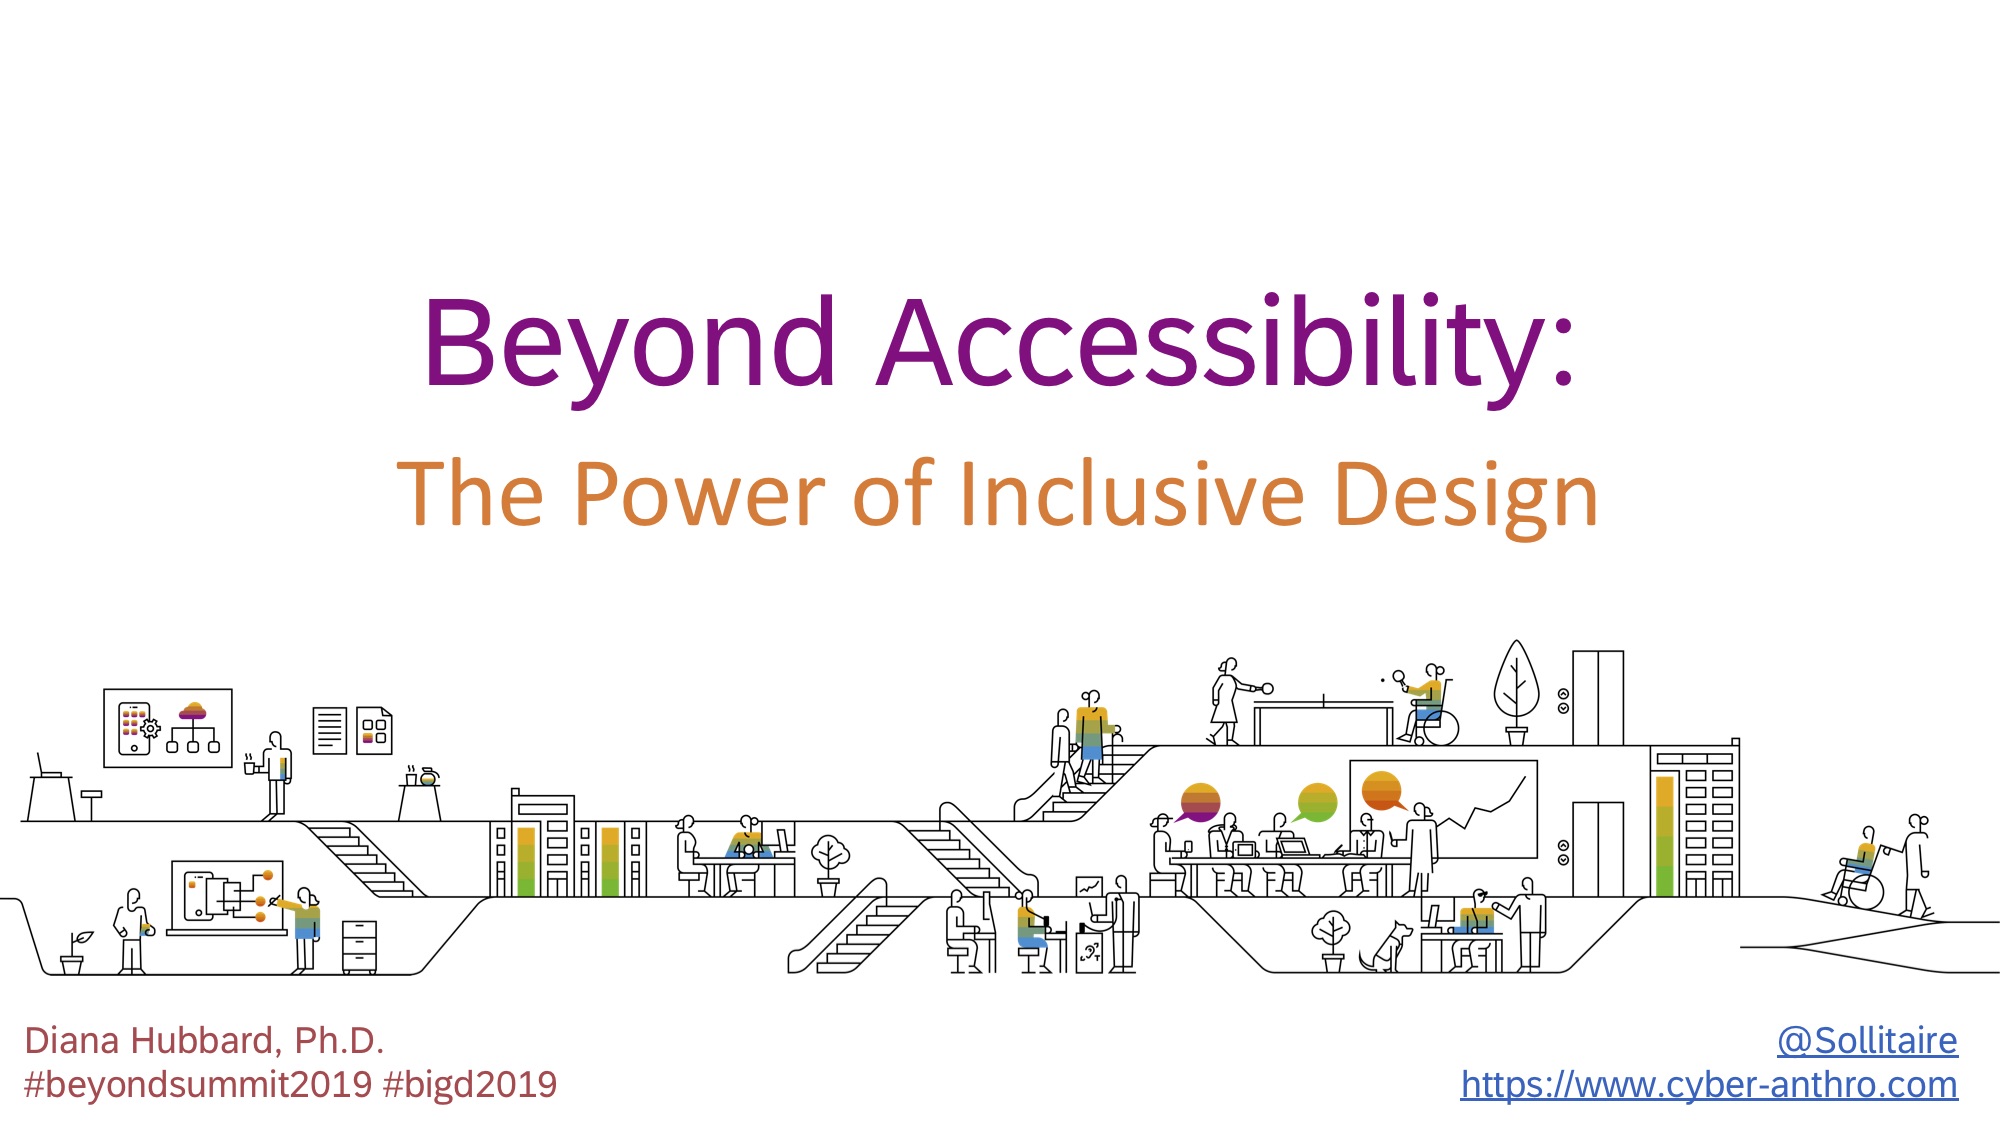 Accessibility In Design  Design + Contemporary Issues